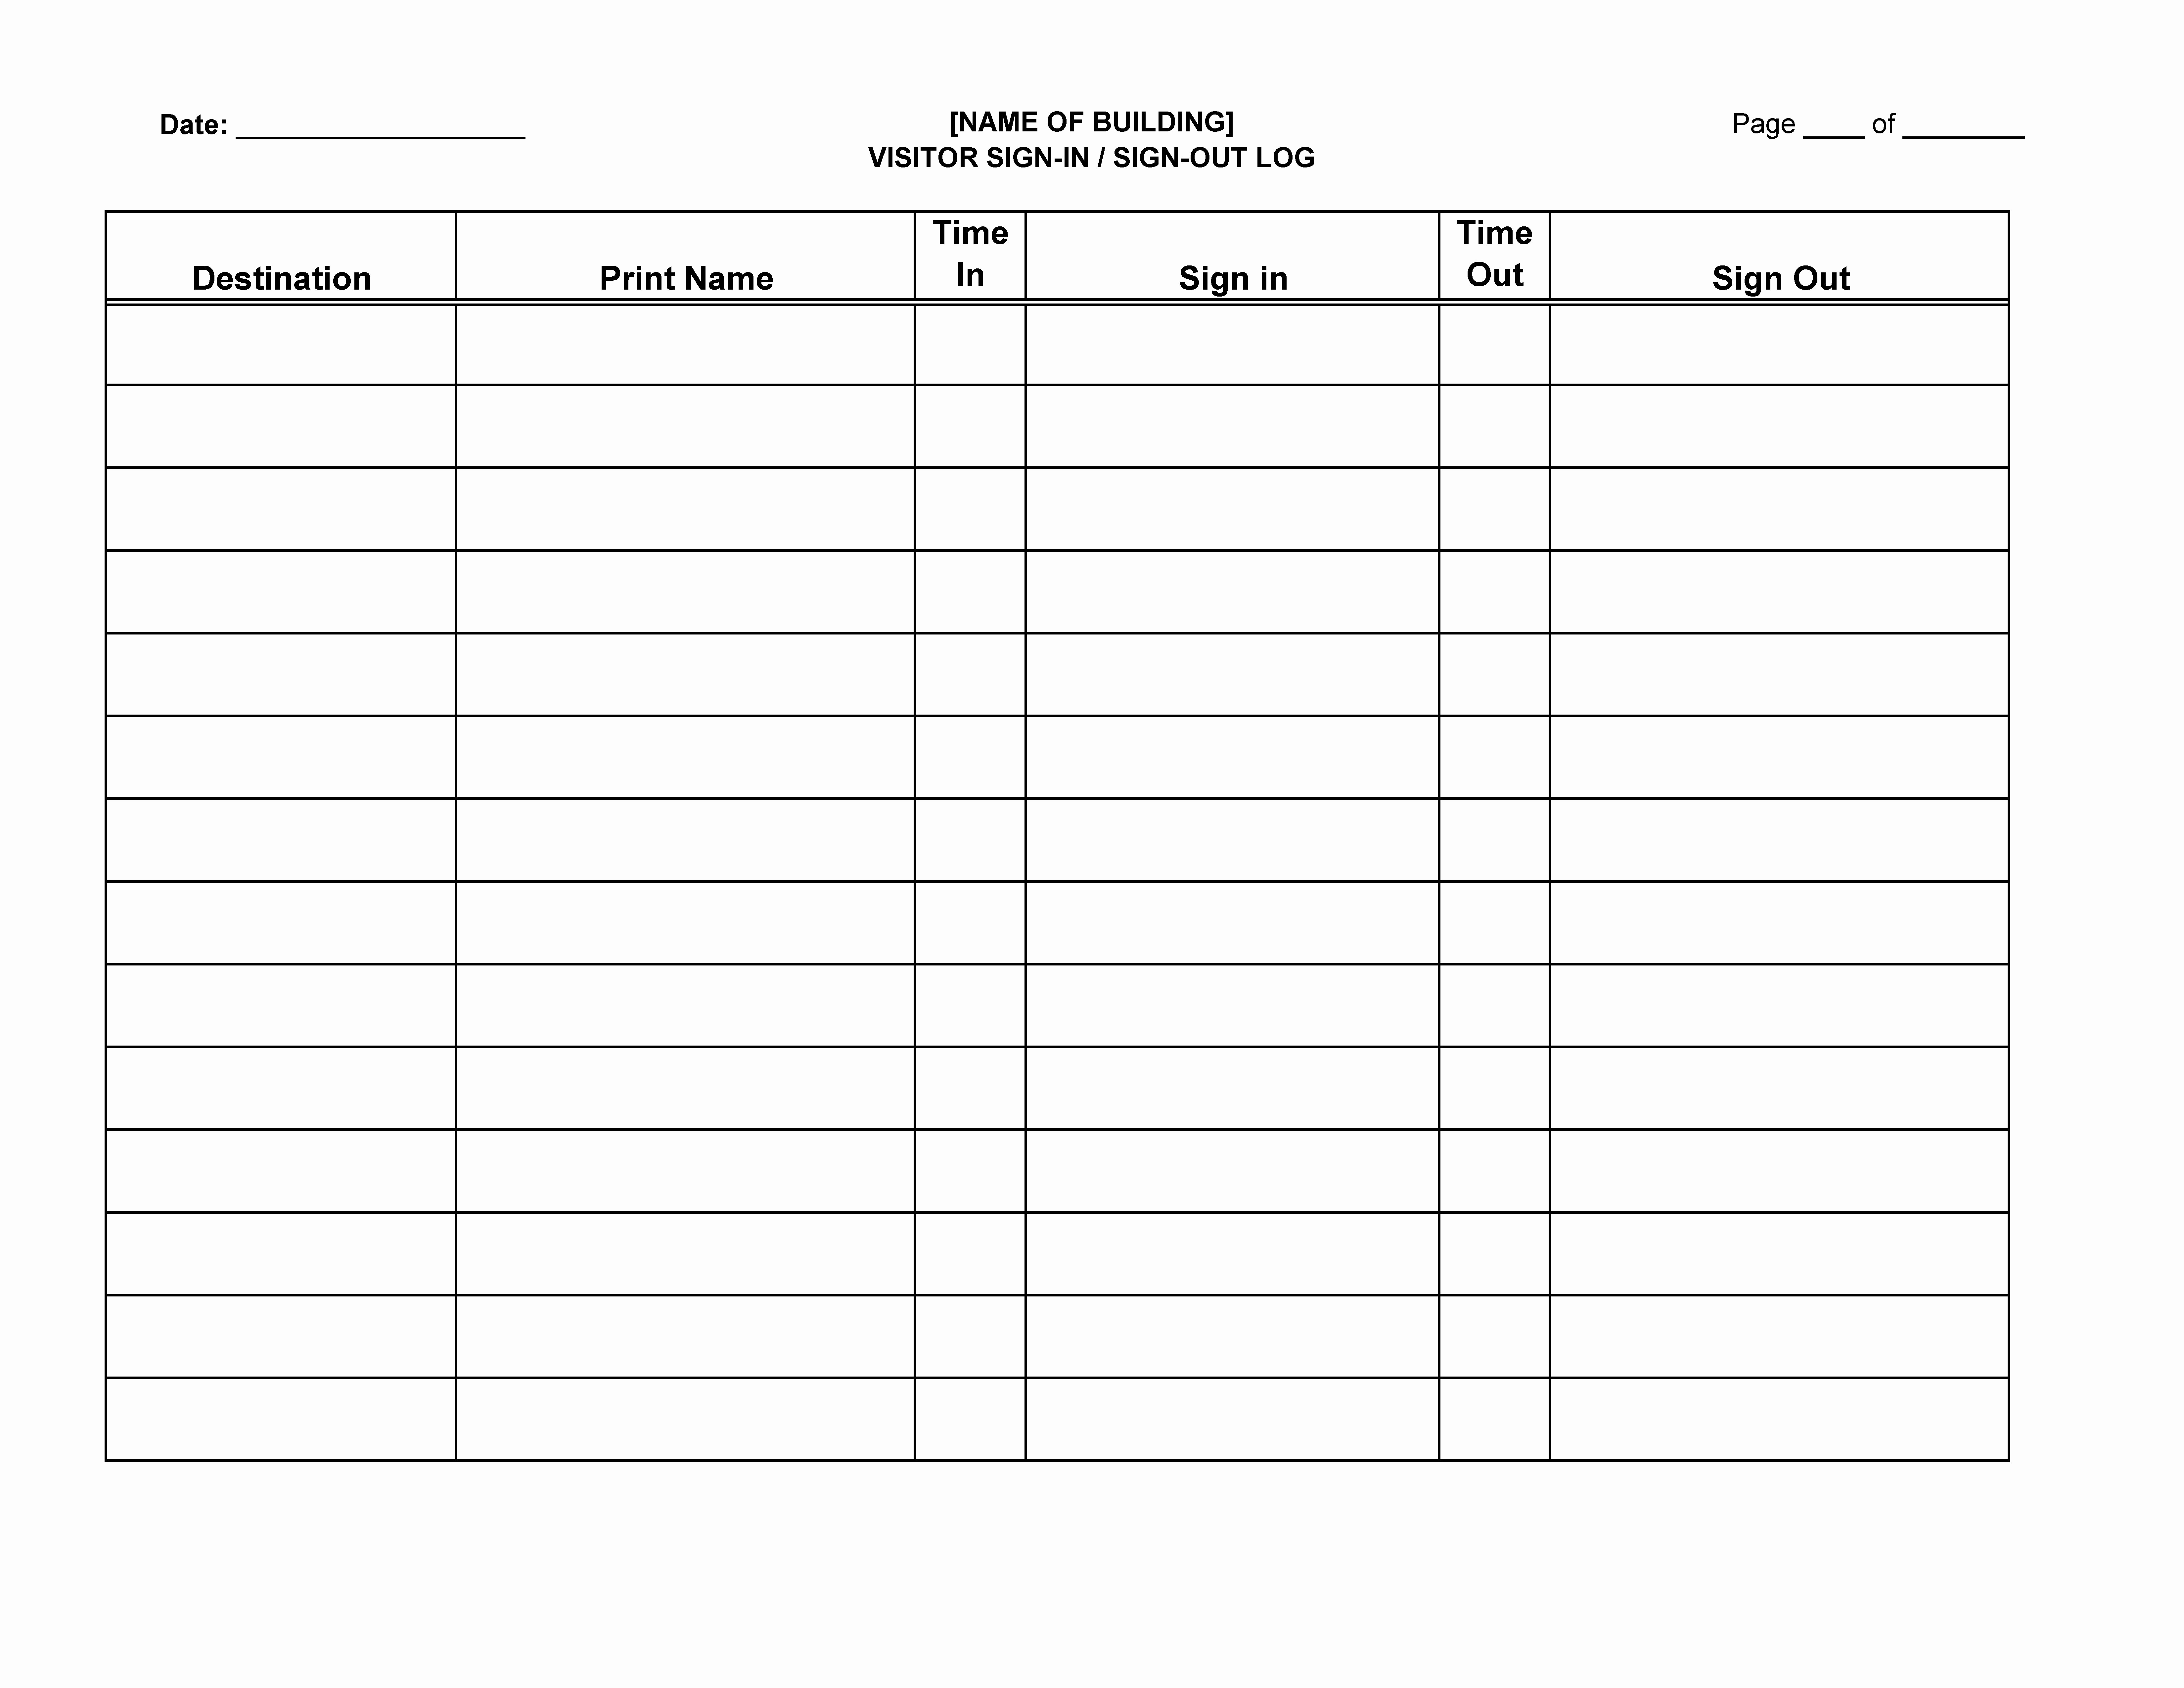 Signing In and Out Template Elegant Visitor Sign In Sign Out Log Sheet